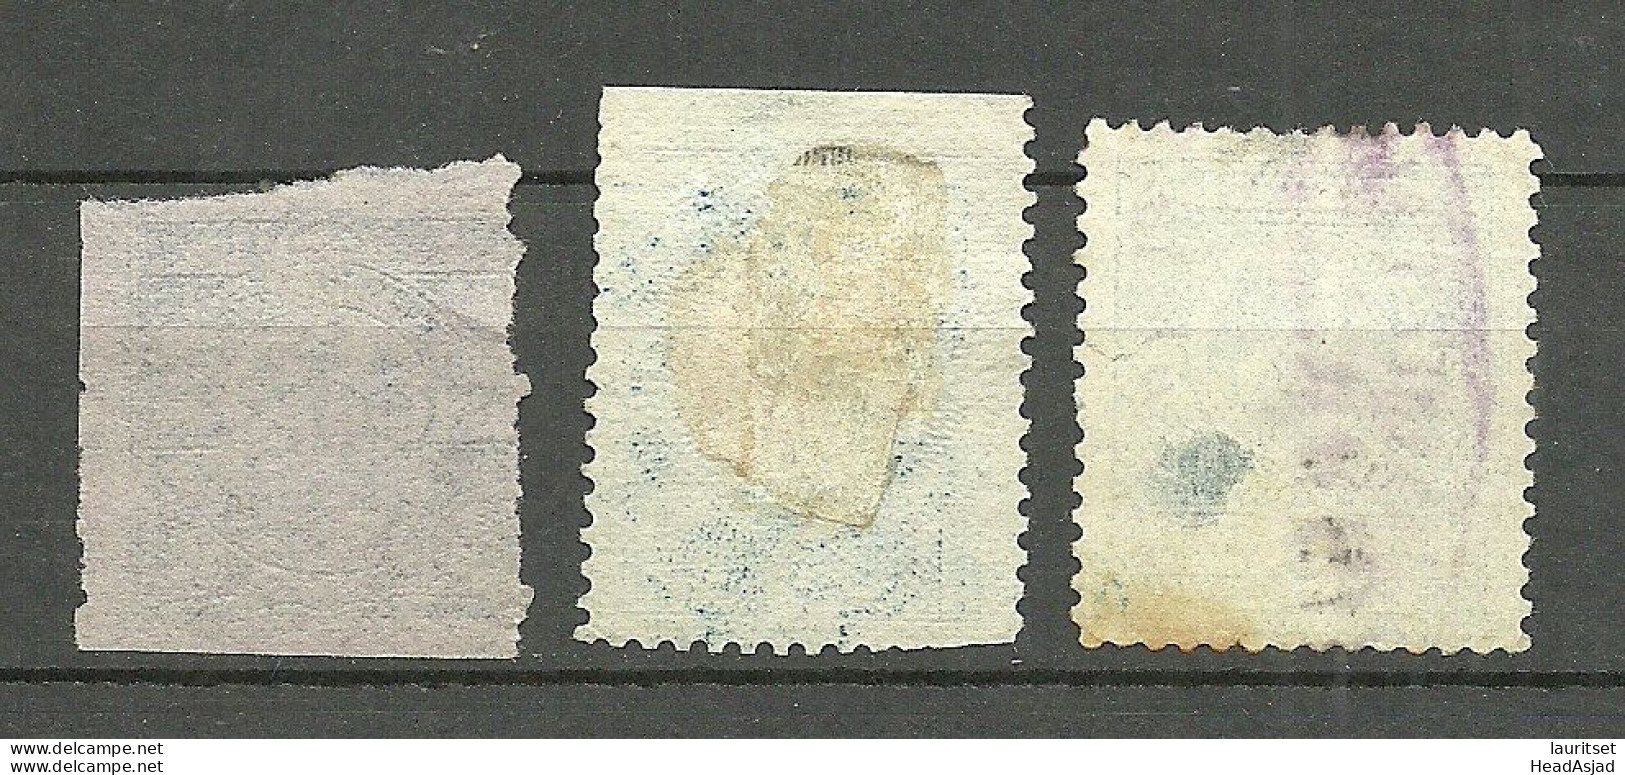 MEXICO 1895-1907, 3 Stamps, Coat Of Arms, O NB! One Stamp Has A Thin! - Mexico